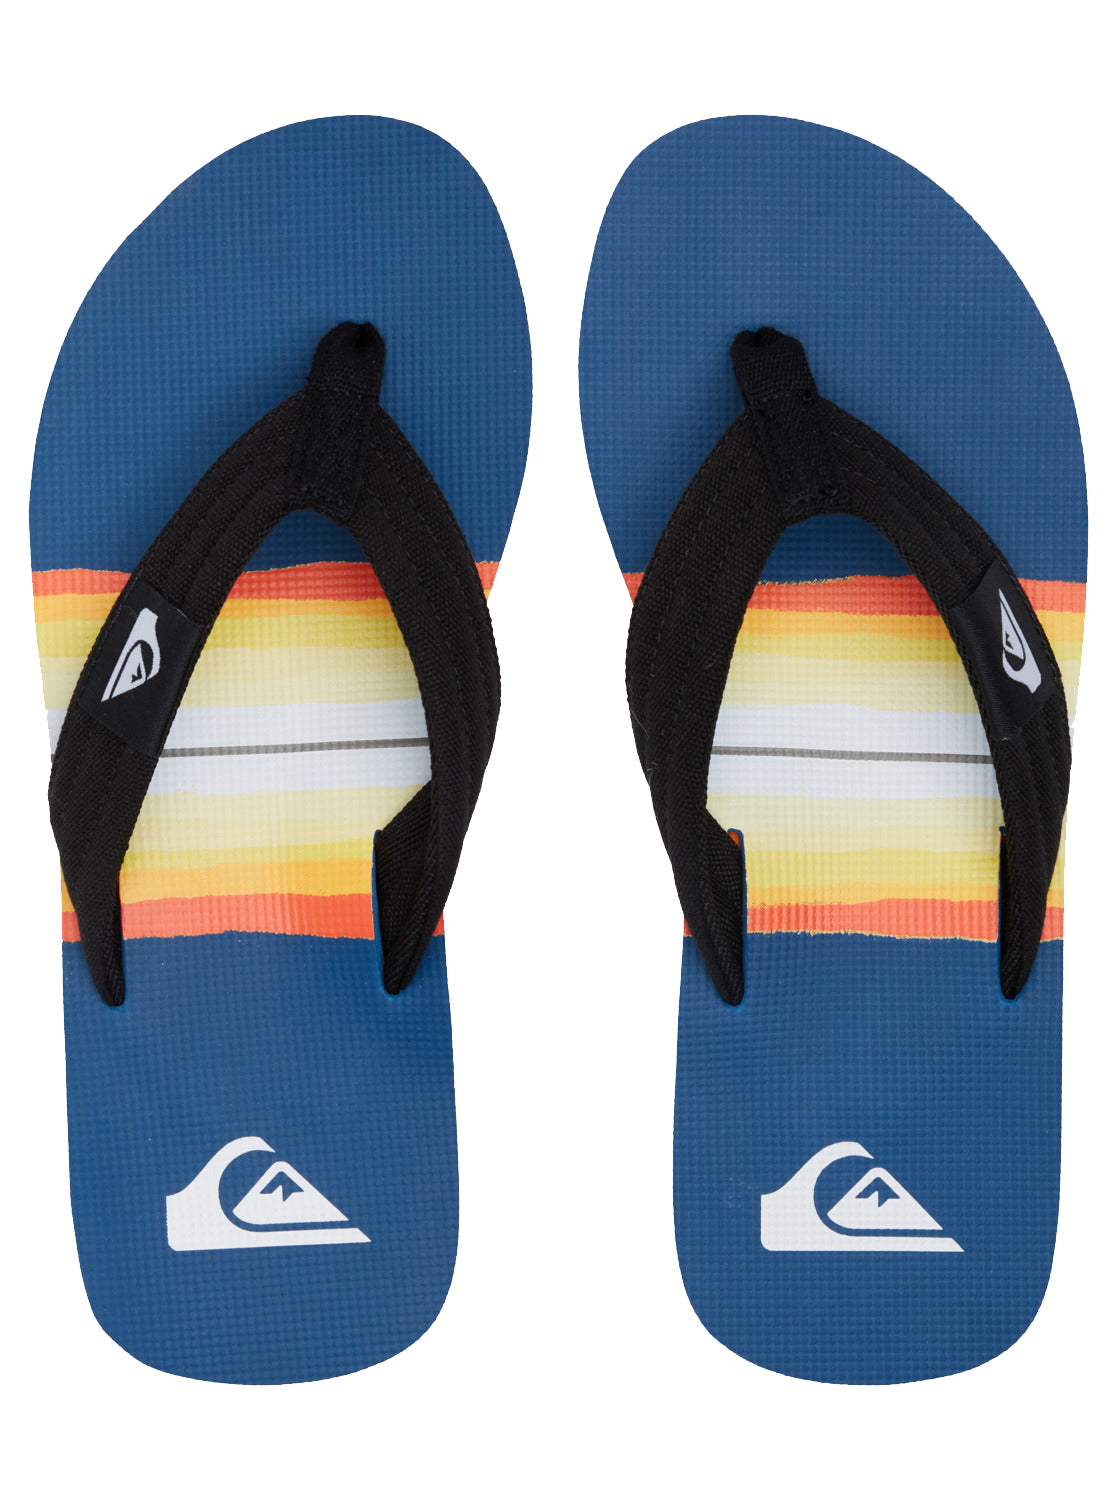 Quiksilver Molokai Layback Youth Sandal BYJ2-Blue 2 10 C